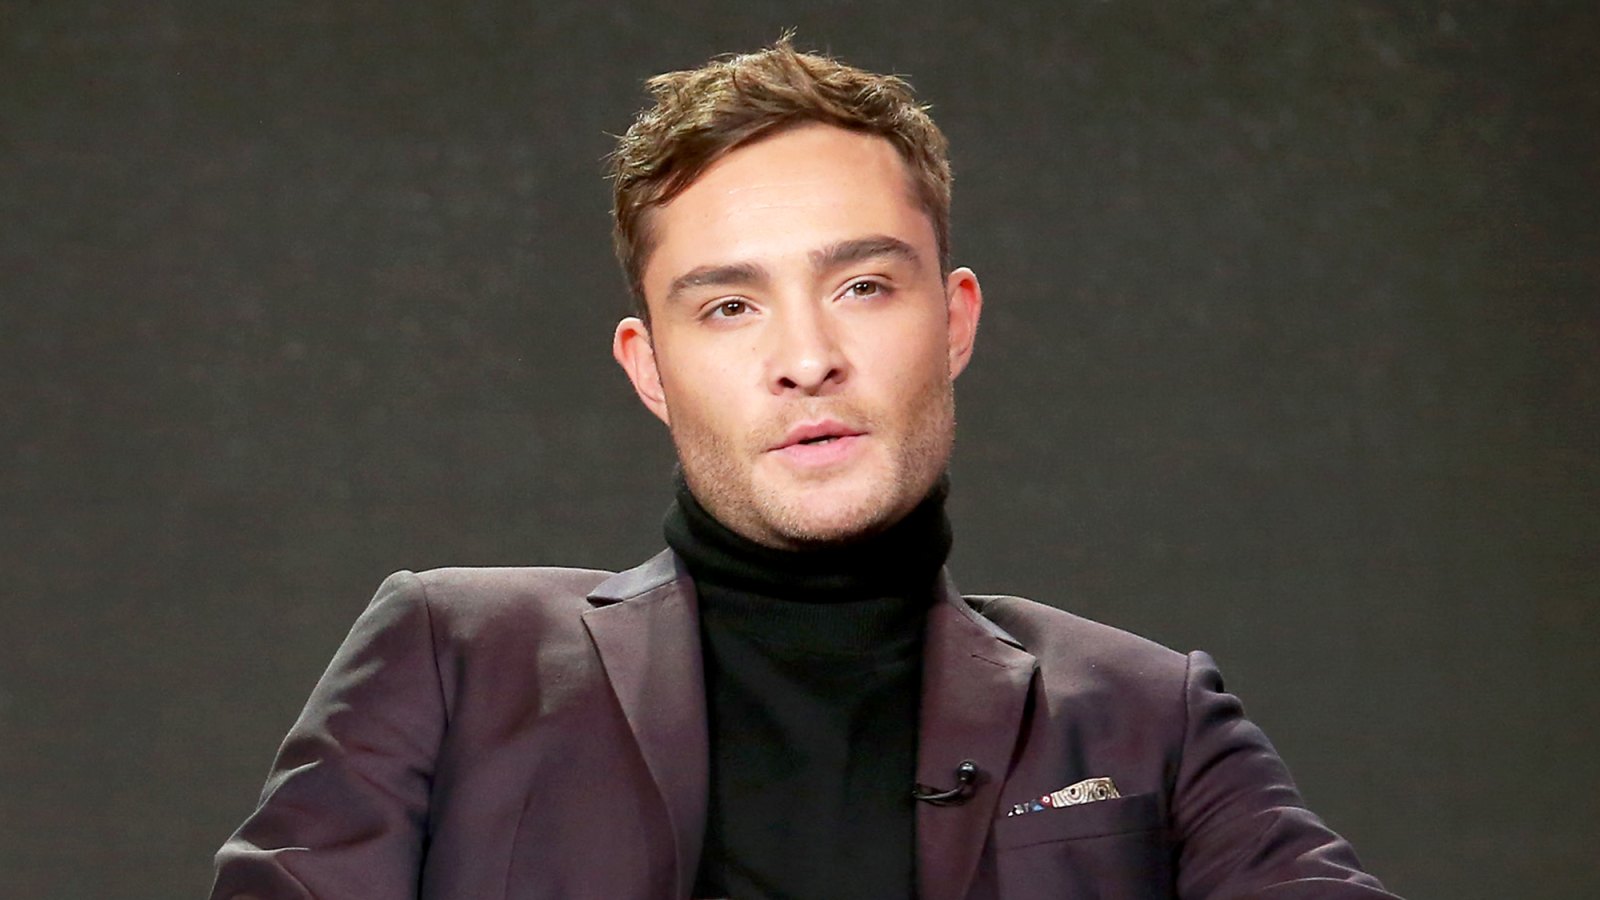 Ed Westwick attends the 2017 Winter Television Critics Association Press Tour at the Langham Hotel in Pasadena, California.